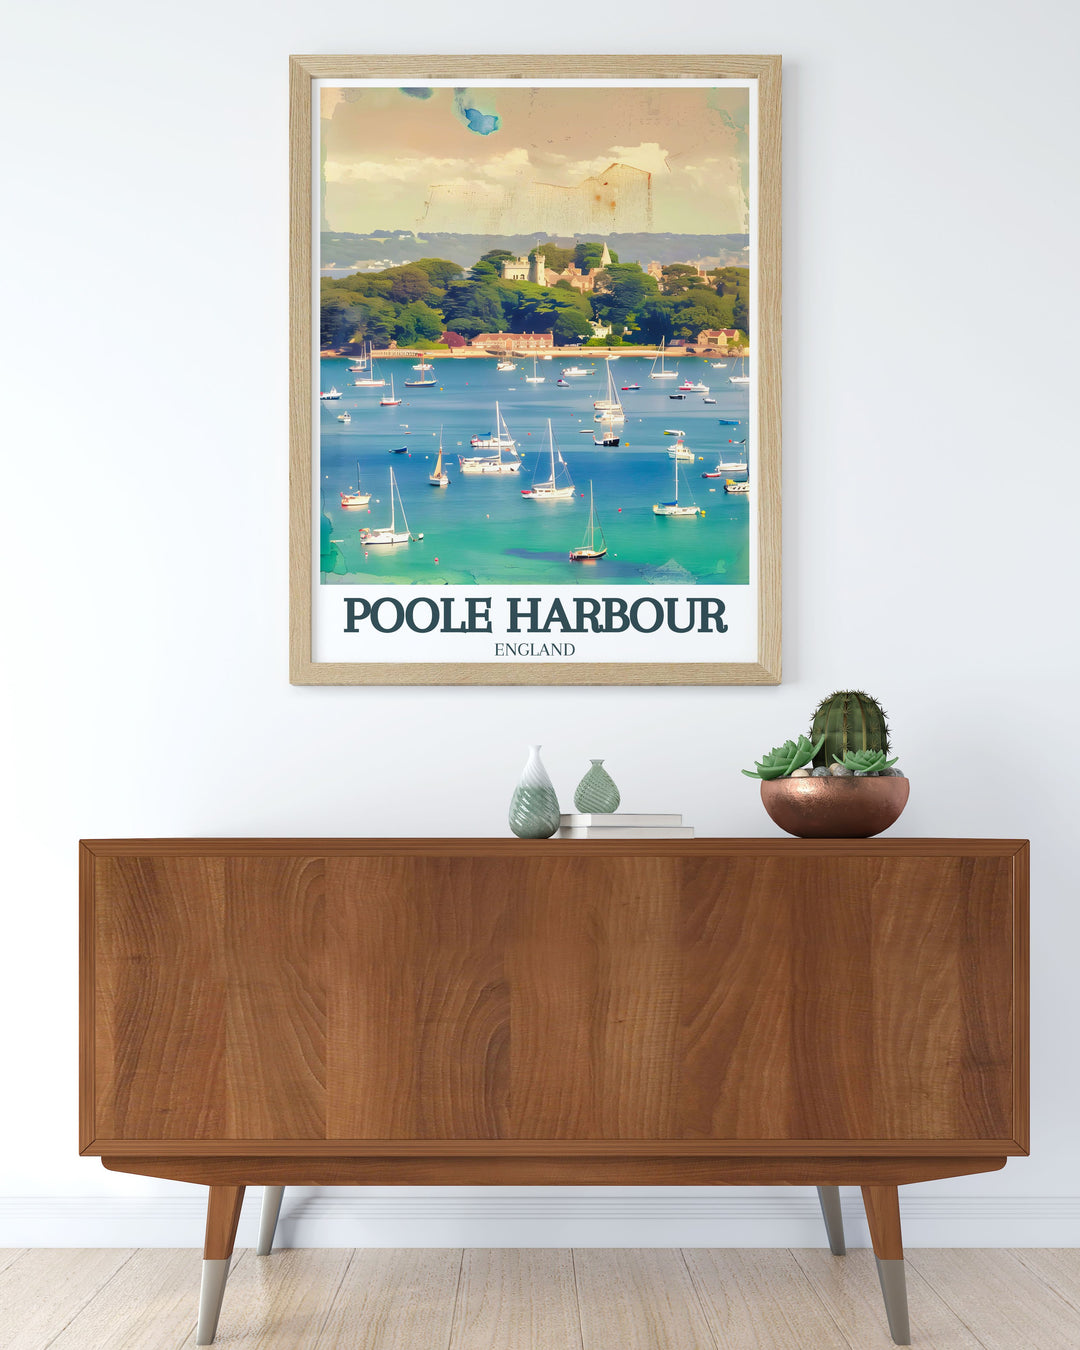 Poole Harbour decor print highlighting the picturesque Brownsea Island and Sandbanks Beach a sophisticated piece of England wall art that enhances any living space perfect for gifts for her or him on special occasions